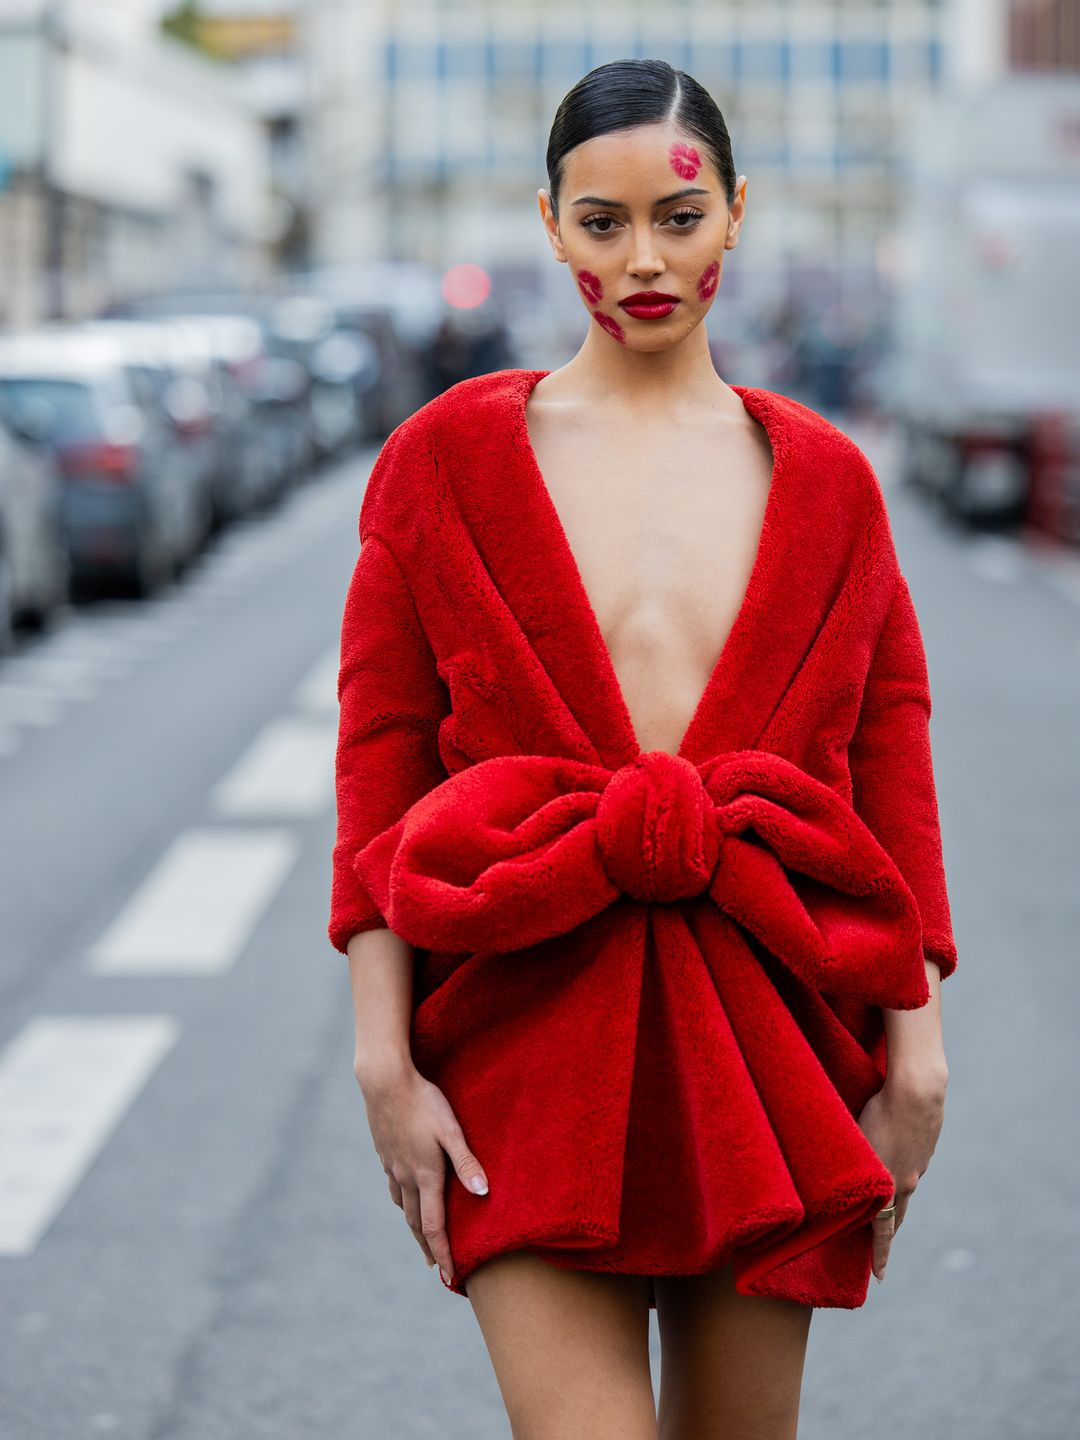 Christian Vierig wears a bright red mini dress adorned with a ginat bow to the Viktor & Rolf show in Paris